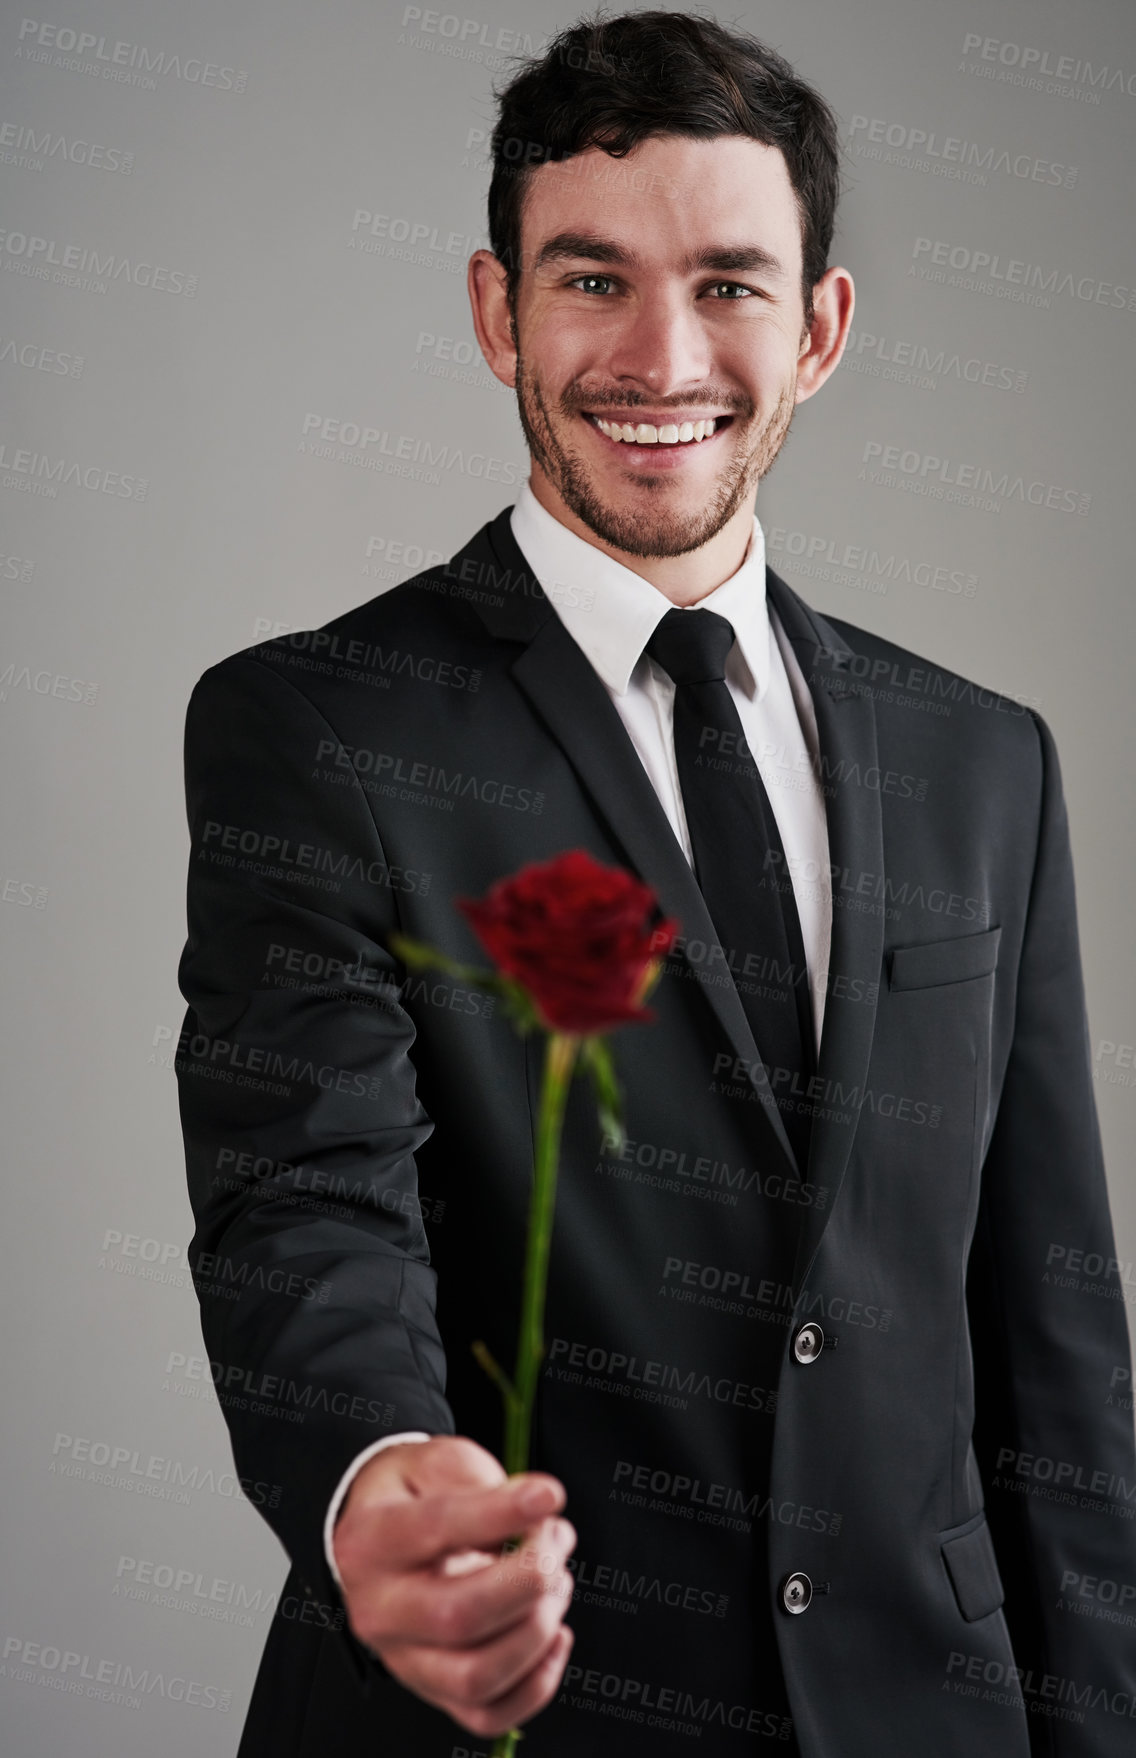 Buy stock photo Studio shot of a well-dressed man holding a red rose against a gray background